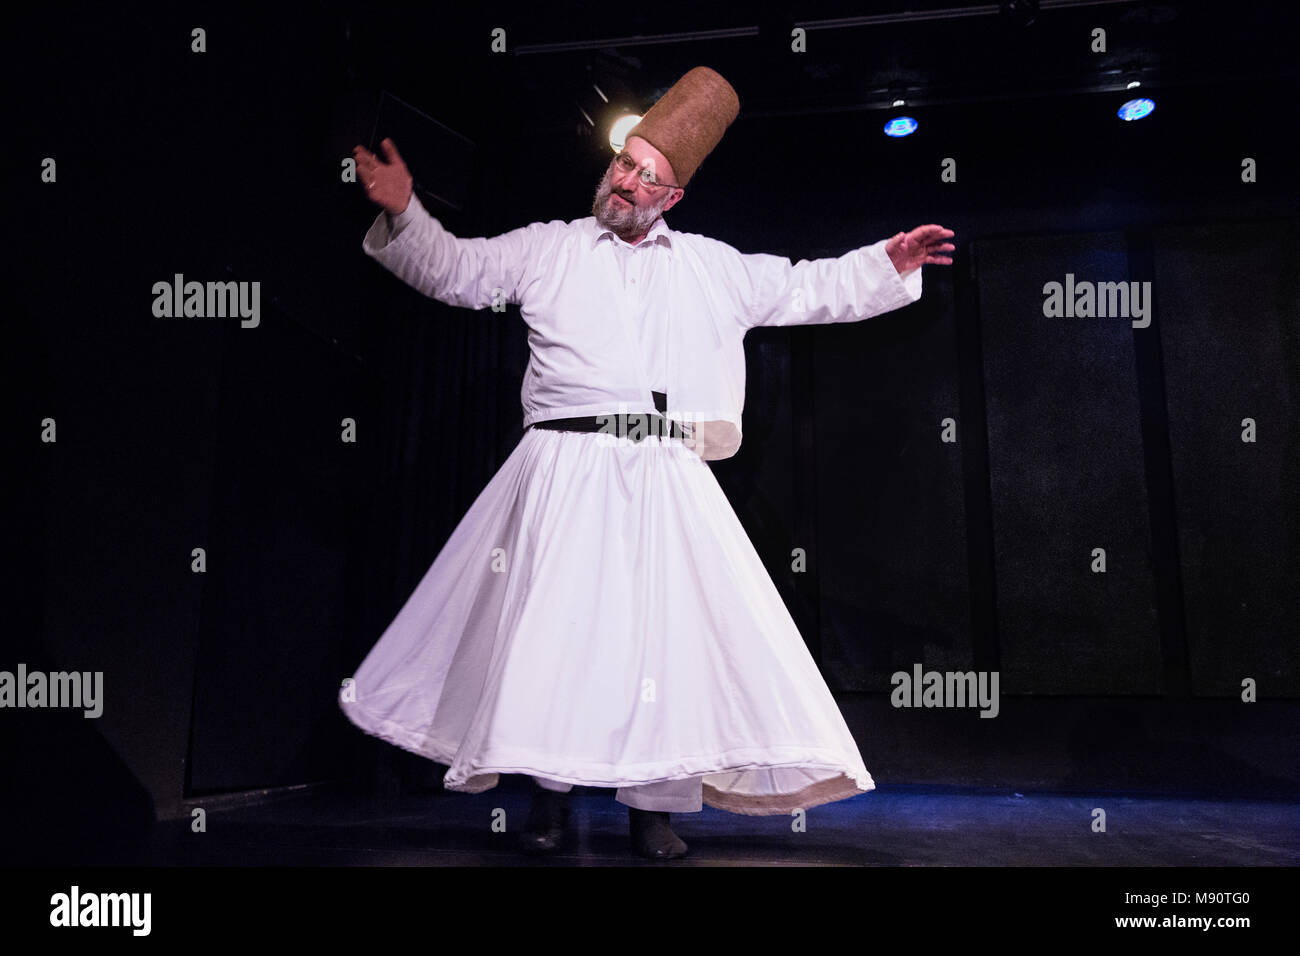 Sufi Dervish Dance High Resolution Stock Photography and Images - Alamy